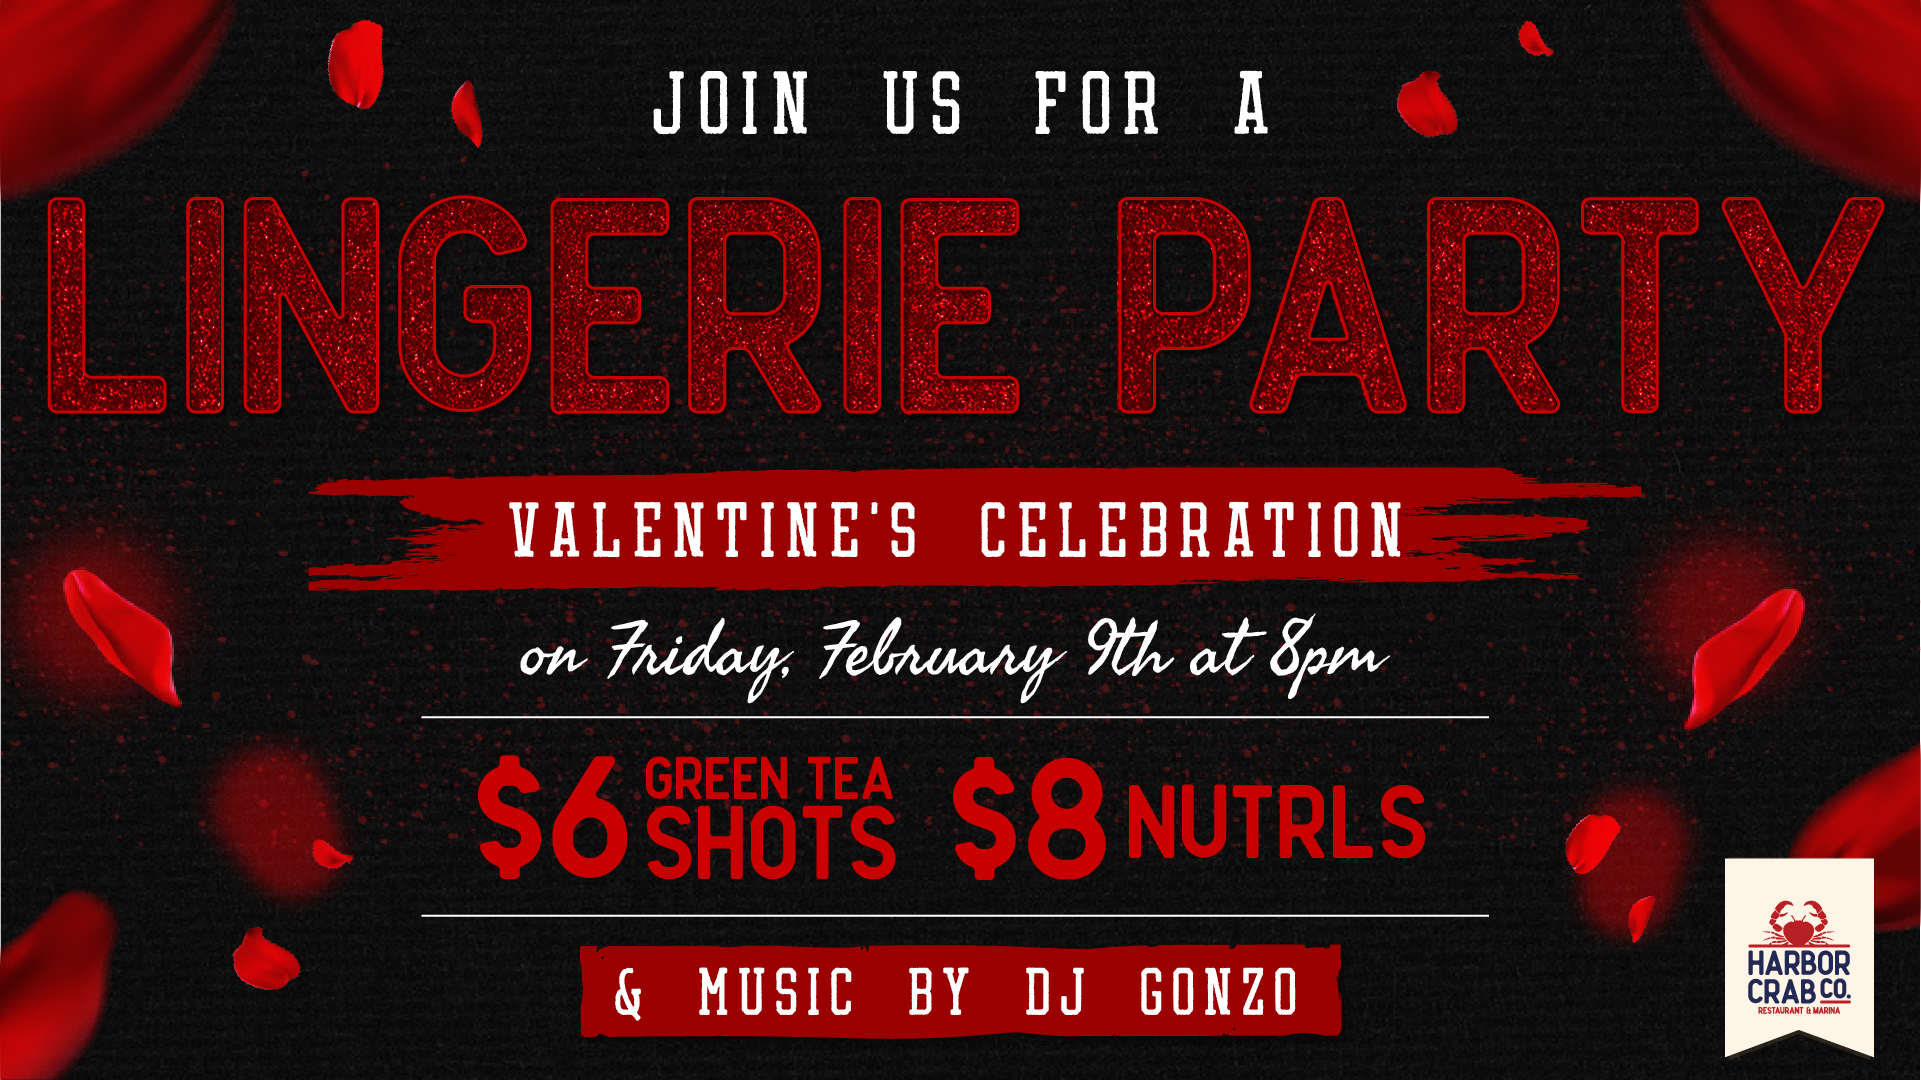 "Invitation to a Lingerie Party at Harbor Crab Co. for a Valentine's celebration on Friday, February 9th at 8 PM with music by DJ Gonzo and drink specials listed.